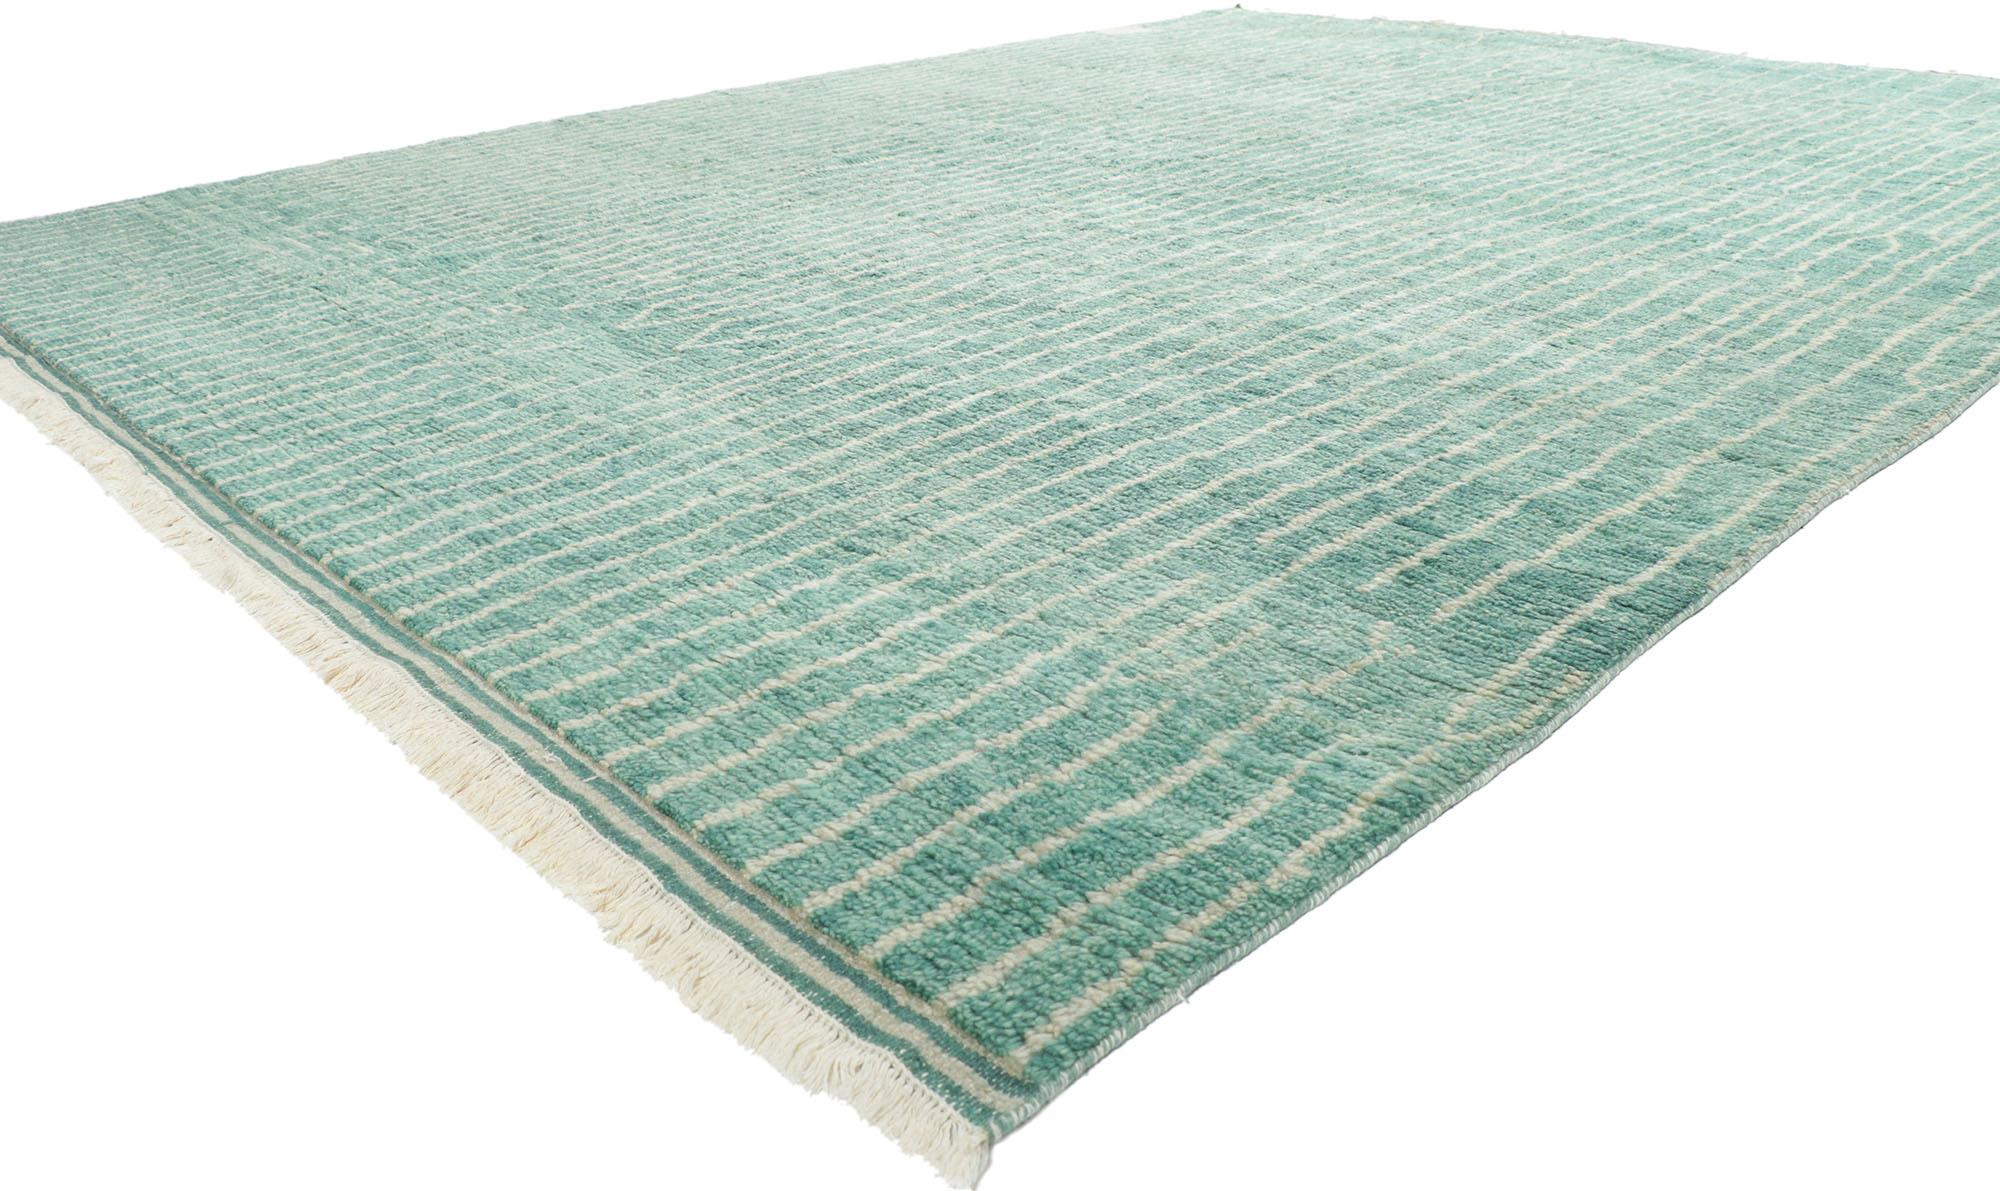 30775 New Contemporary Moroccan Style Rug 09'02 x 11'07. Channeling a coastal cottage with colors reminiscence of sea glass and weathered wood, this hand-knotted wool contemporary Moroccan style rug is a captivating vision of woven beauty. The